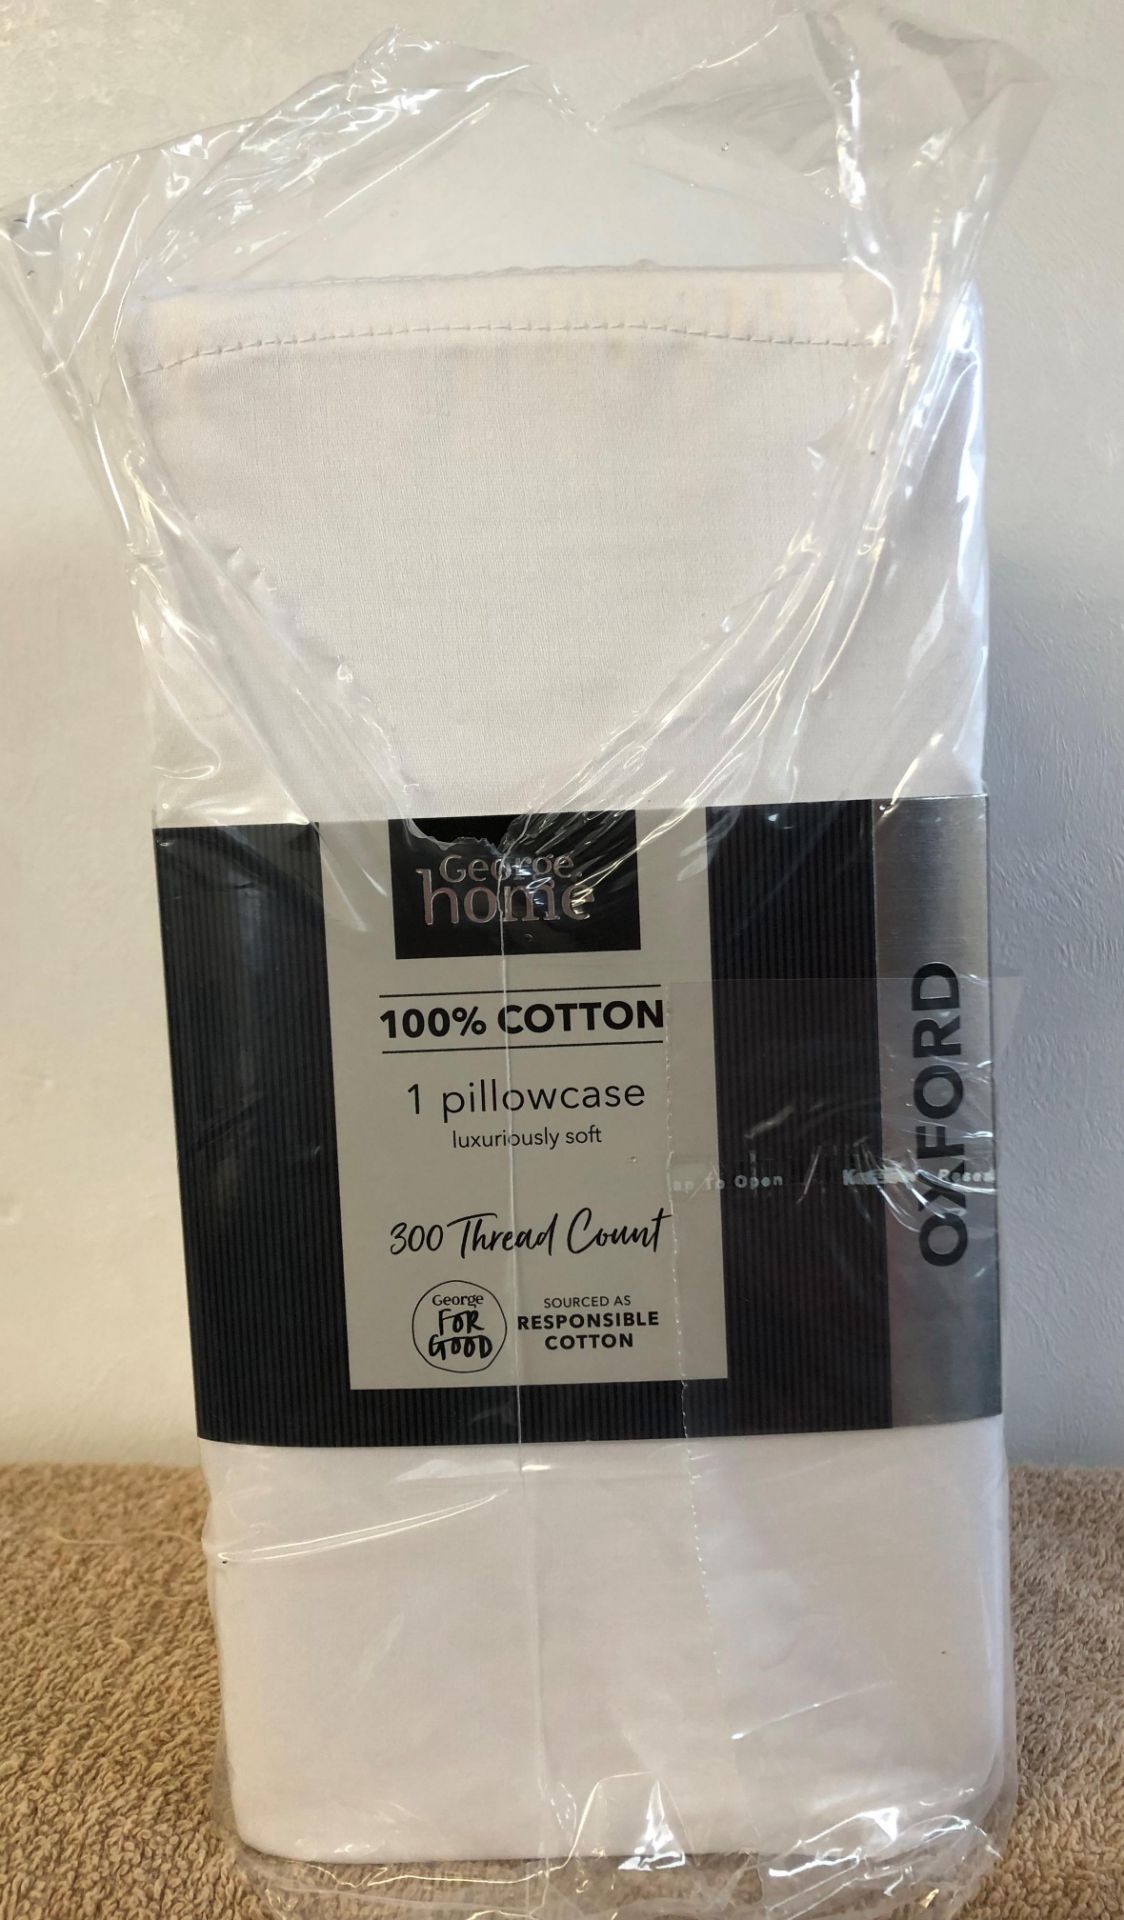 6 WHITE OXFORD PILLOWCASES LUXURY SOFT 300 THREAD COUNT W48 X L74CM 100% COTTON BY GEORGE HOME - Image 3 of 3